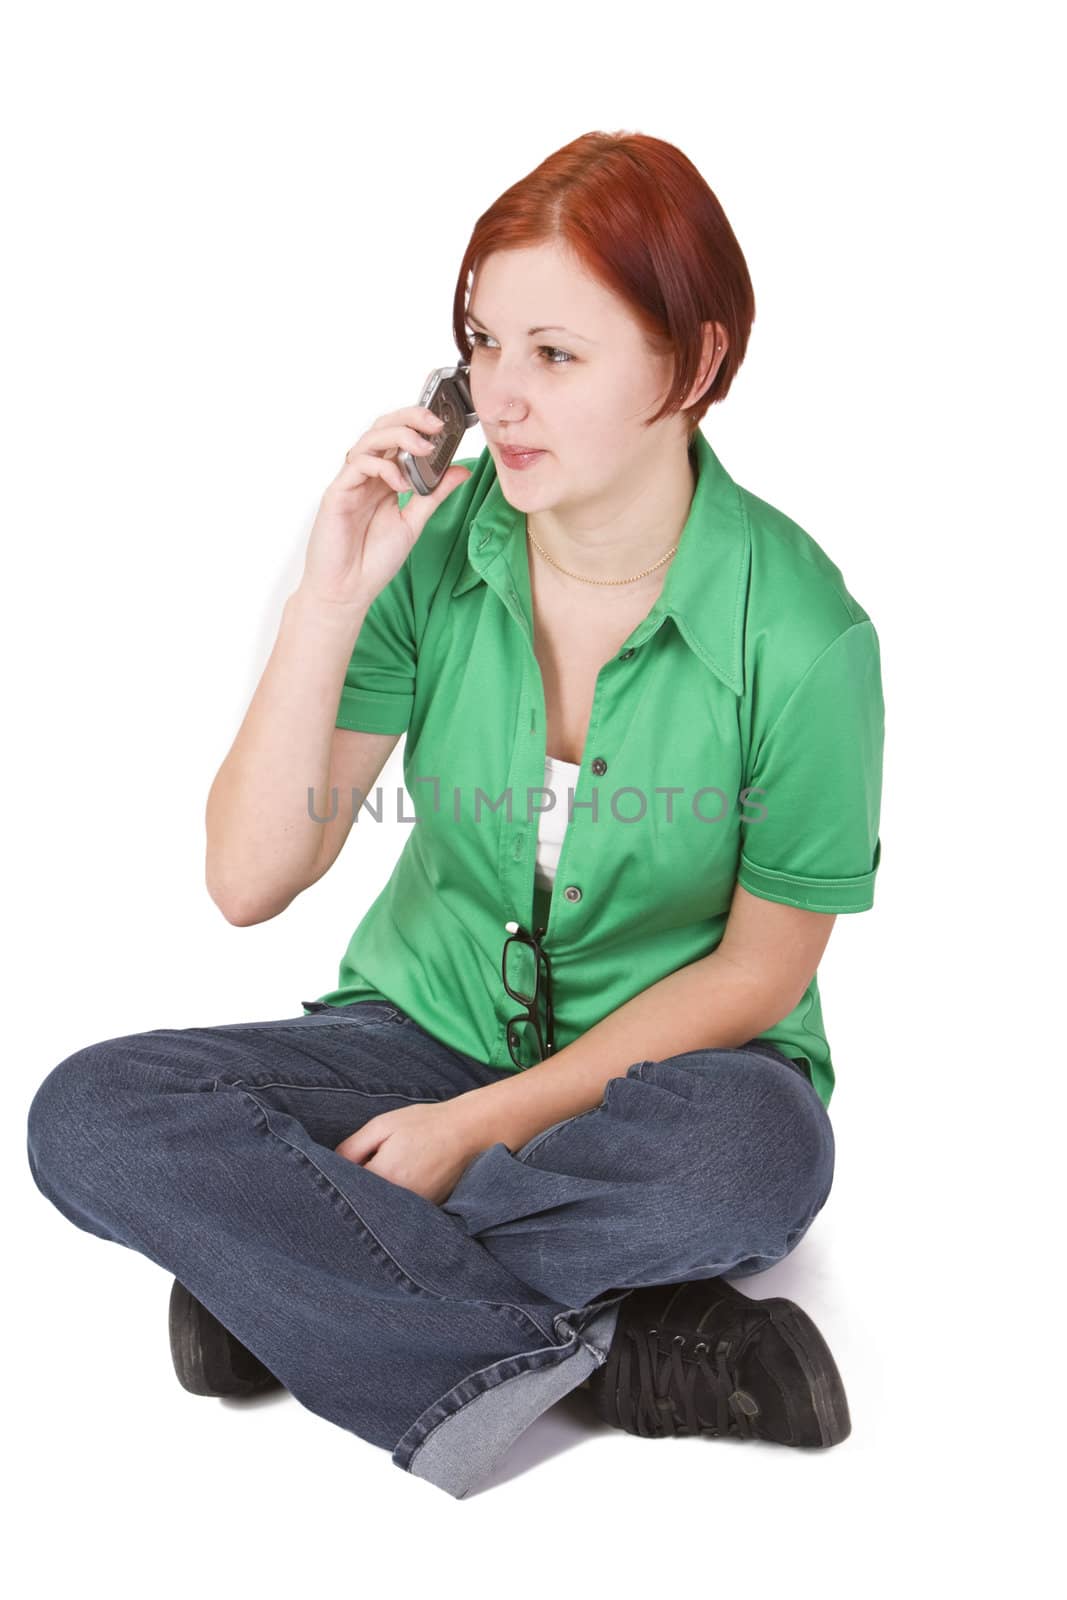 Image of a redheaded teenager girl using a mobile phone.